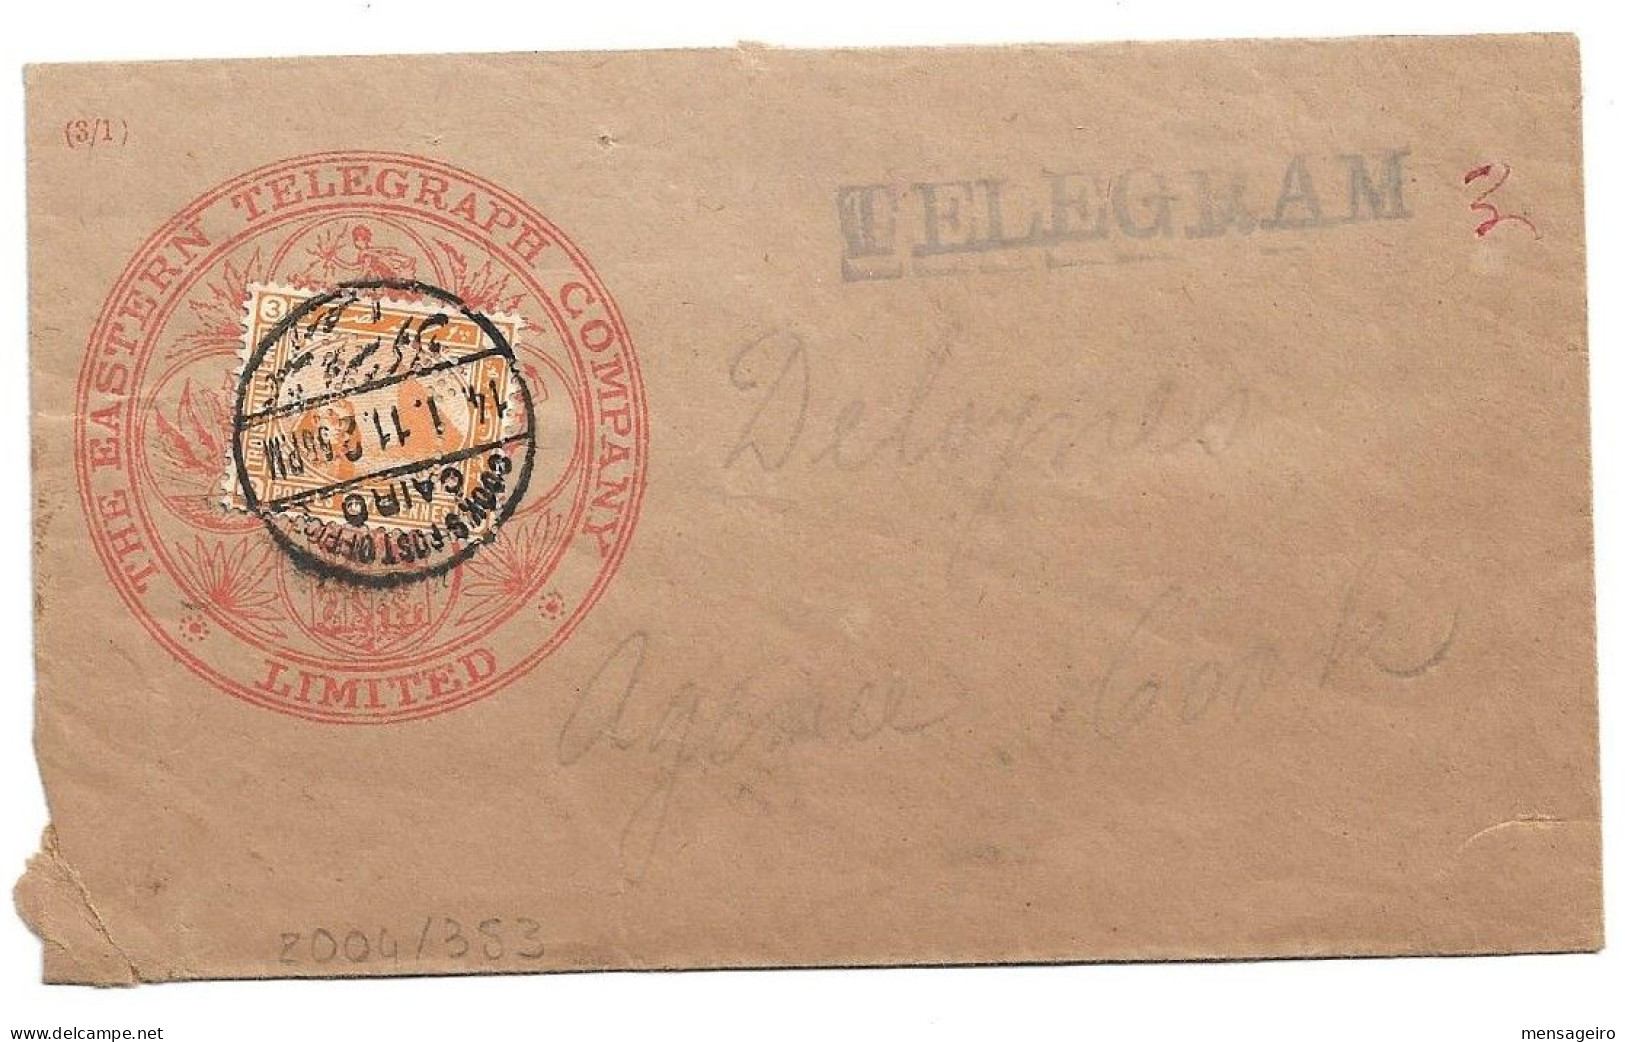 (C04) EASTERN TELEGRAM COVER WITH 3M. STAMP PERFIN "T C/ & S" (INVERTED) - COOKS POST OFFICE / CAIRO => COOK AGENCY - 1866-1914 Khedivaat Egypte